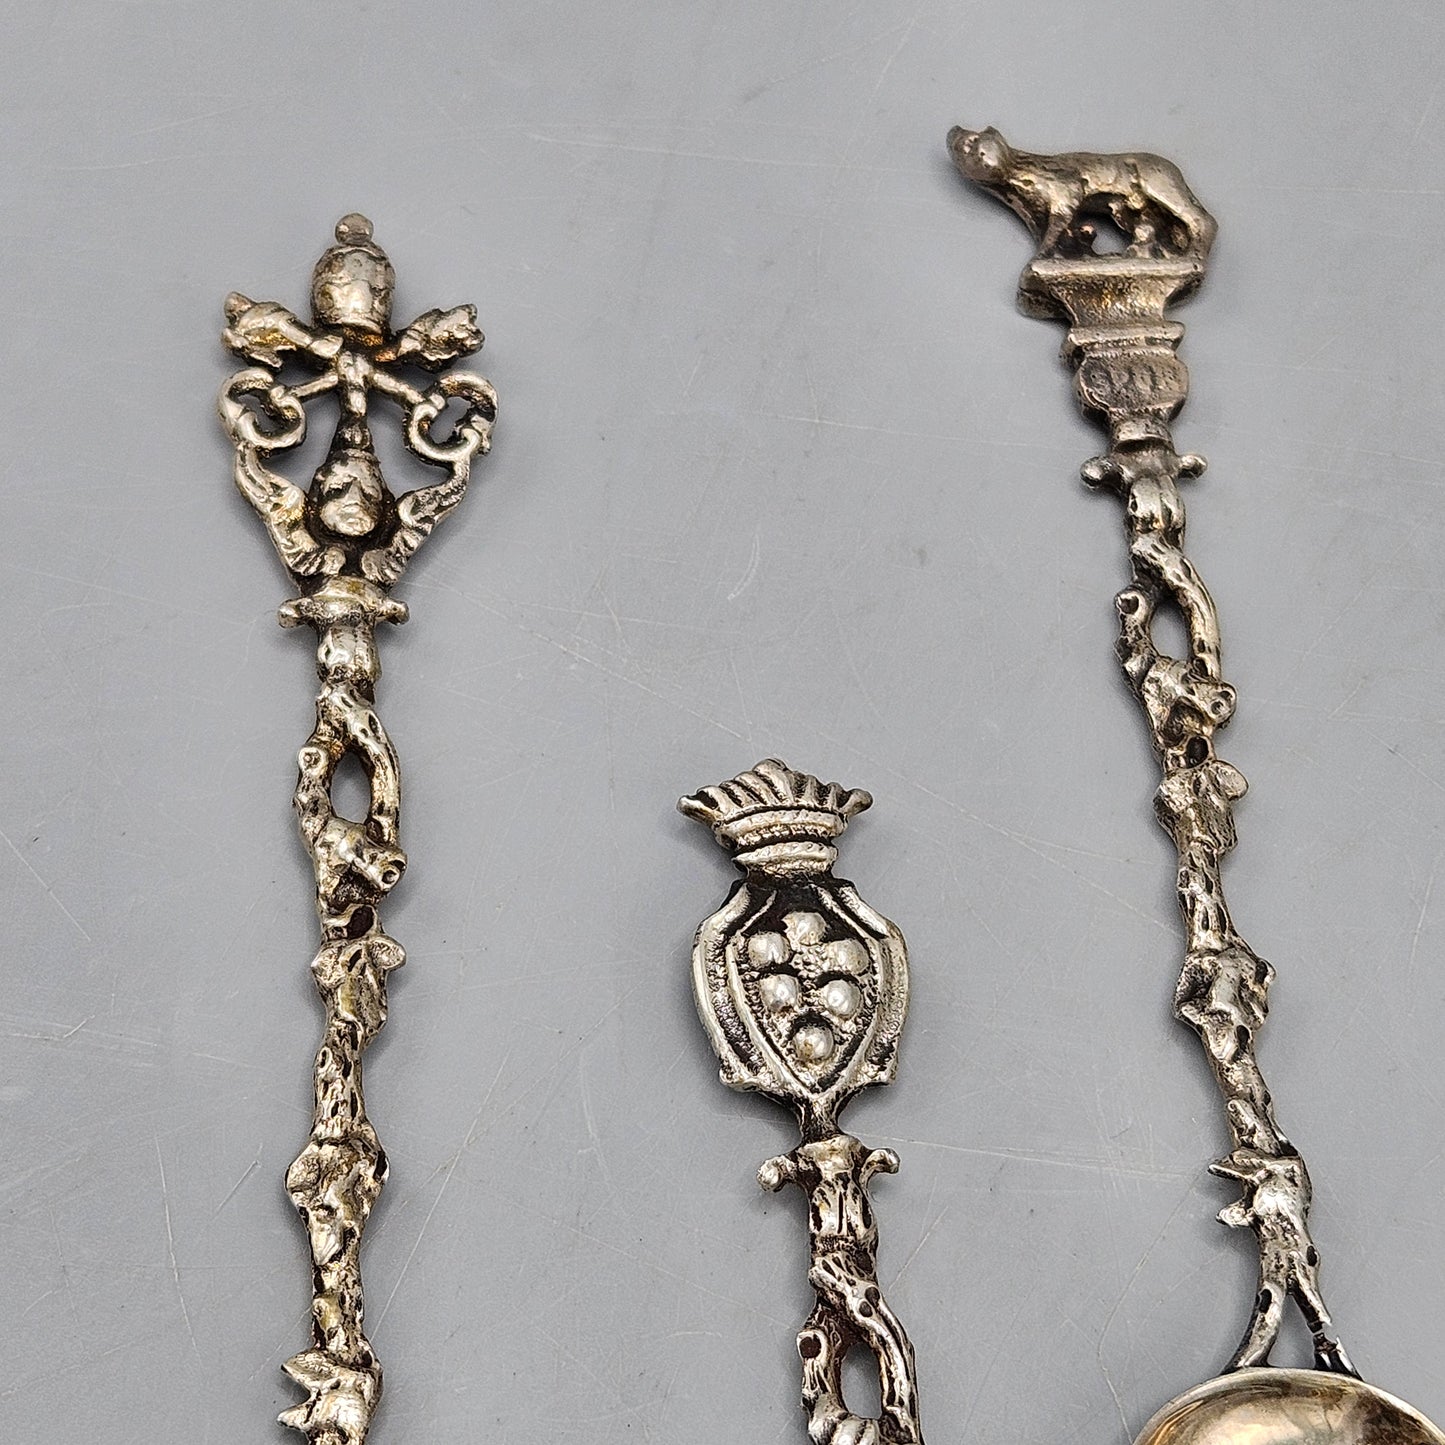 Set of 7 Vintage 800 Silver Figural Spoons from Italy with Shovel Bowls